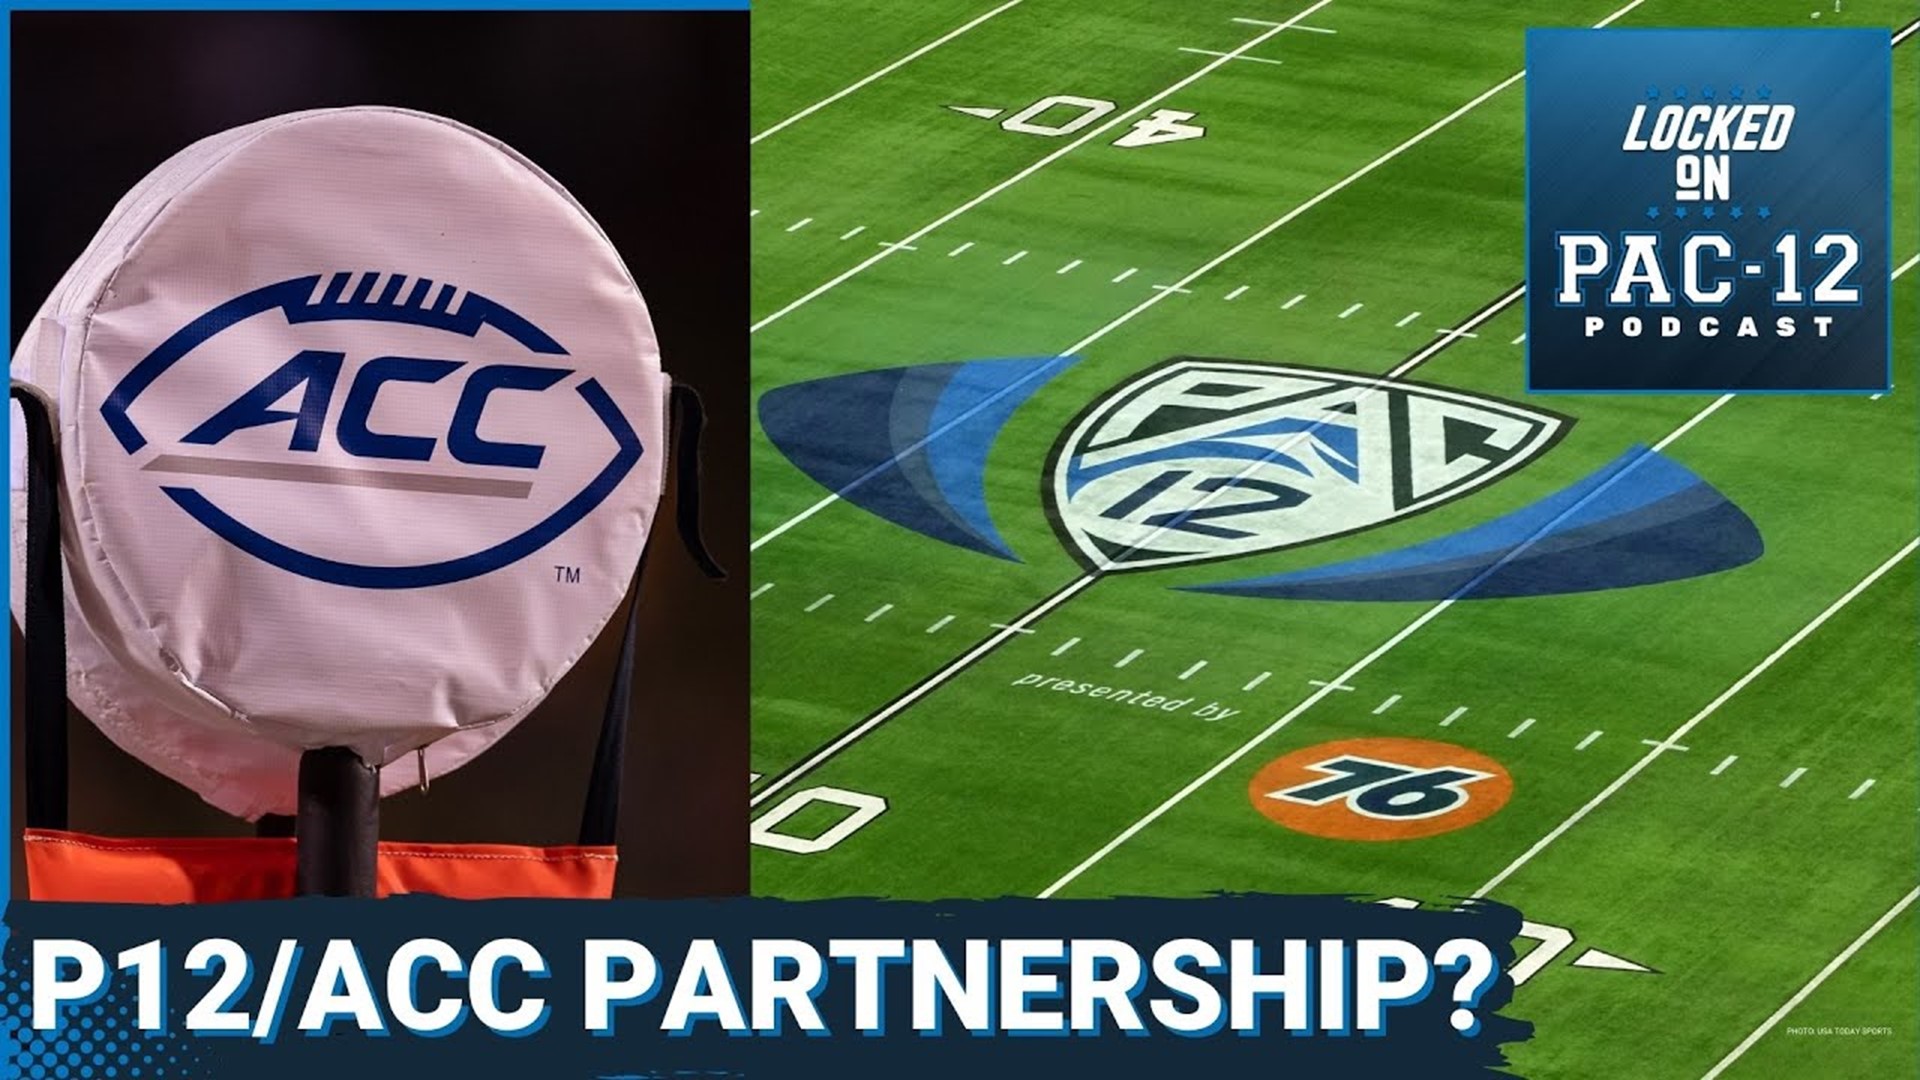 The Pac-12, ACC, and Big 10 announced an "alliance" many moons ago that the Big 10 went back on when they poached USC and UCLA from the Pac-12.